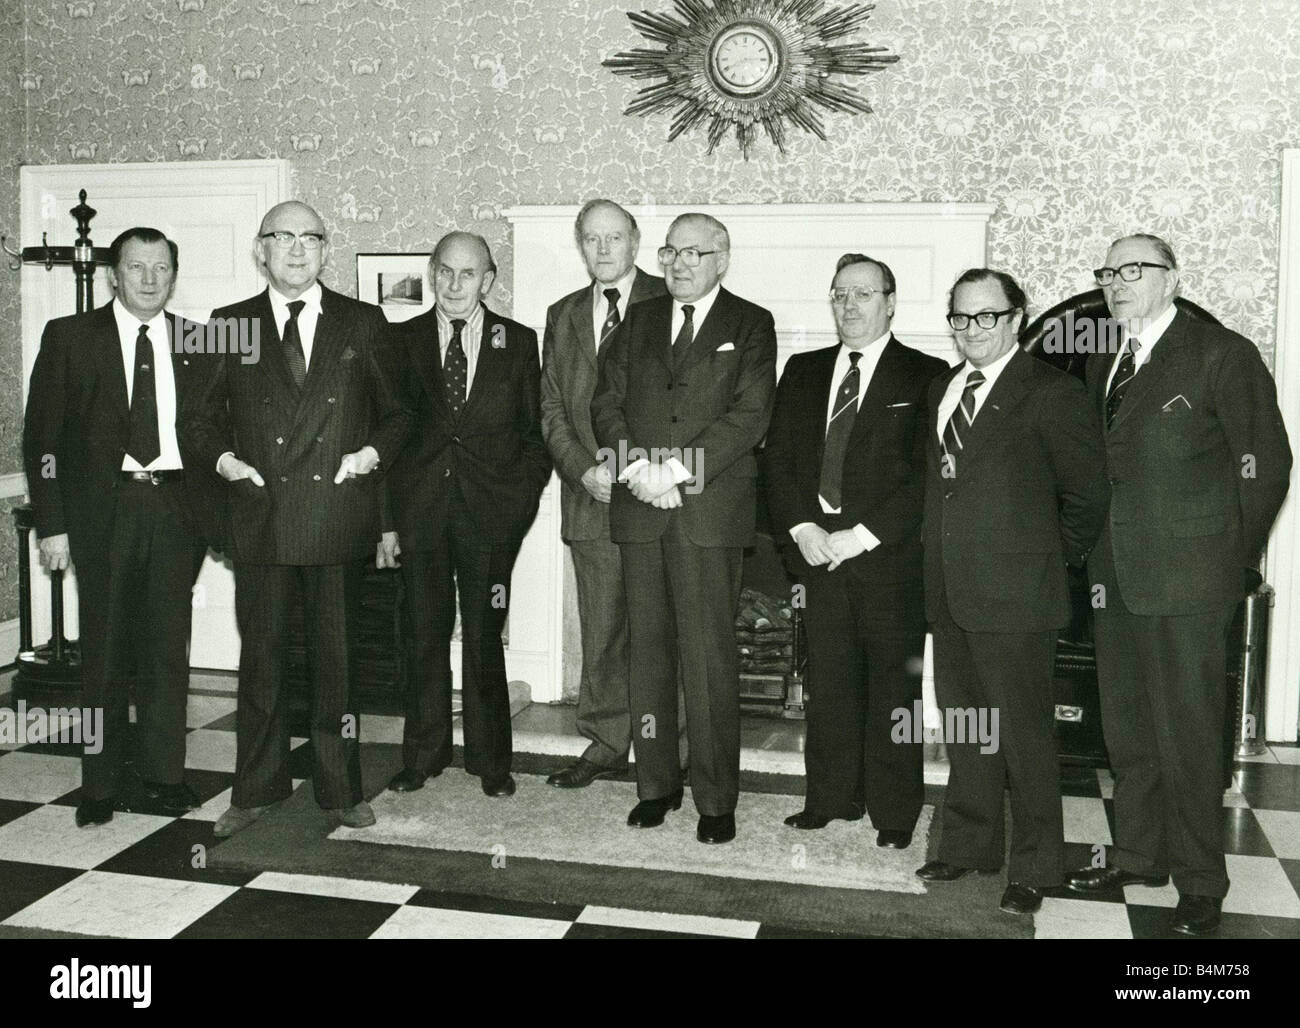 The Prime Minister James Callaghan seen here in 10 Downing Street with the TUC Leadership l r Ray Buckton A S L E F Lord Allen U S D A W Bill Keyes S O G A T David basnett G M W Moss Evans T G W Clive Jenkins A S T M S and John Boyd A U E W Stock Photo